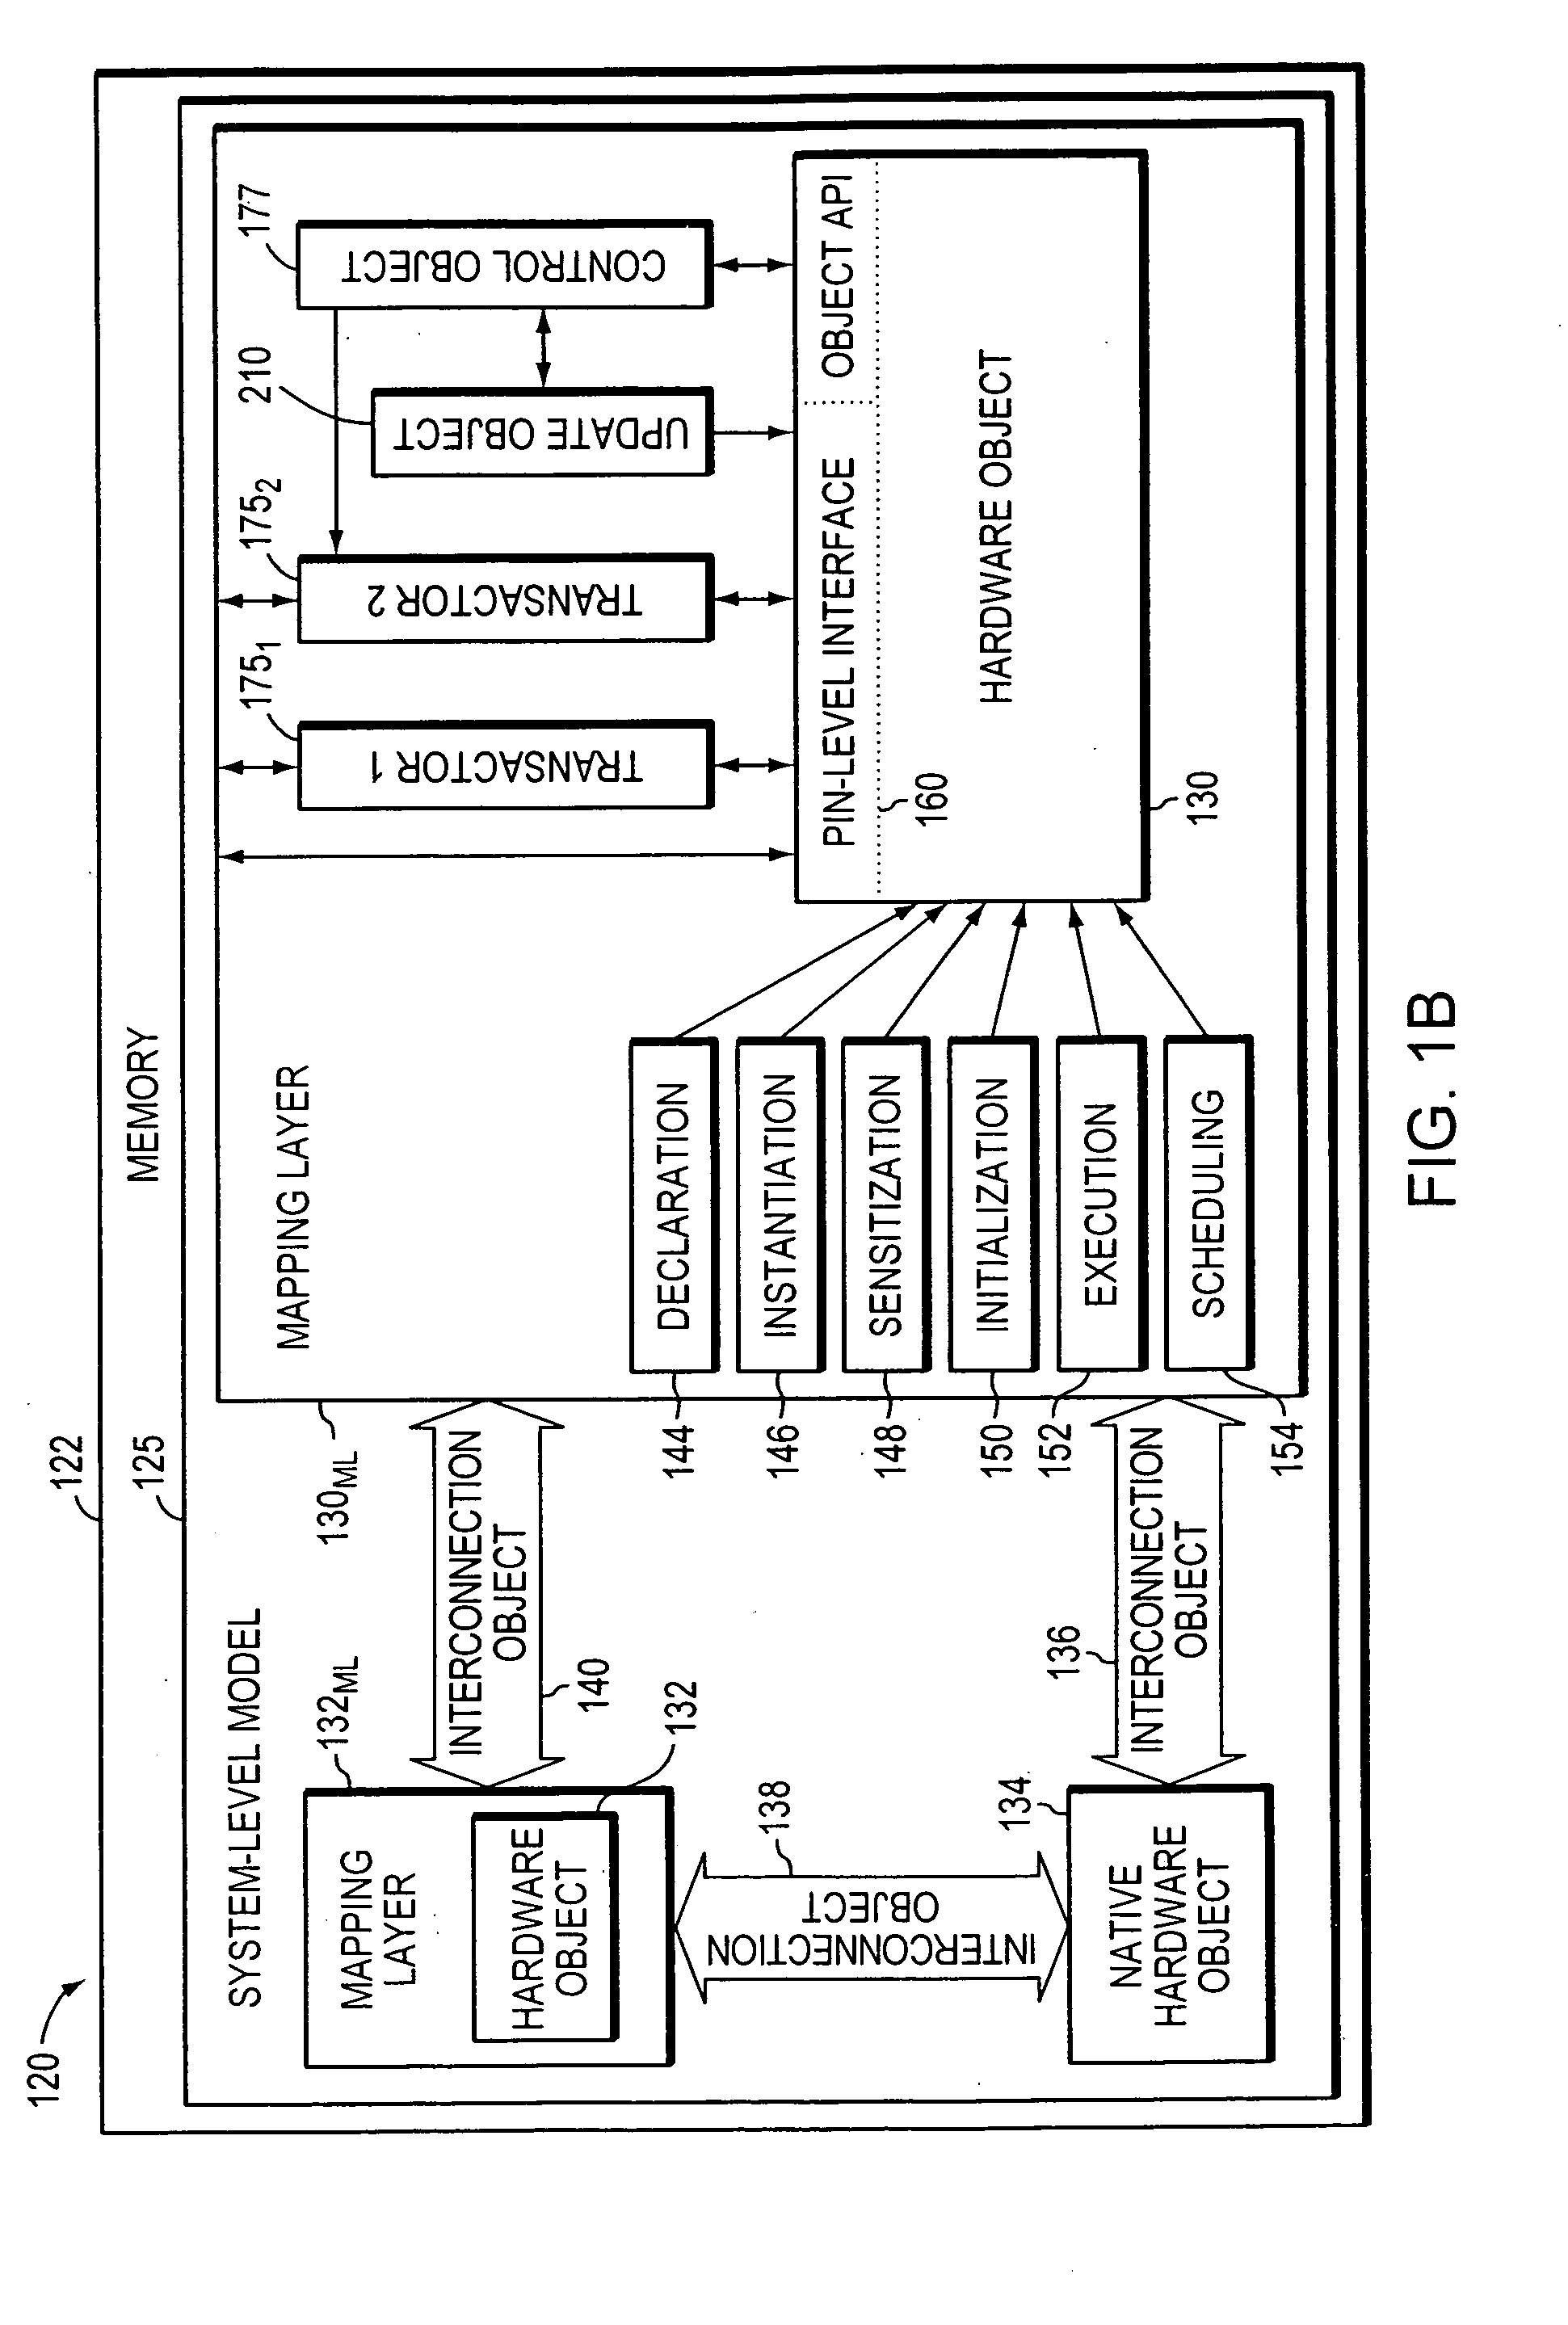 System-level simulation of interconnected devices